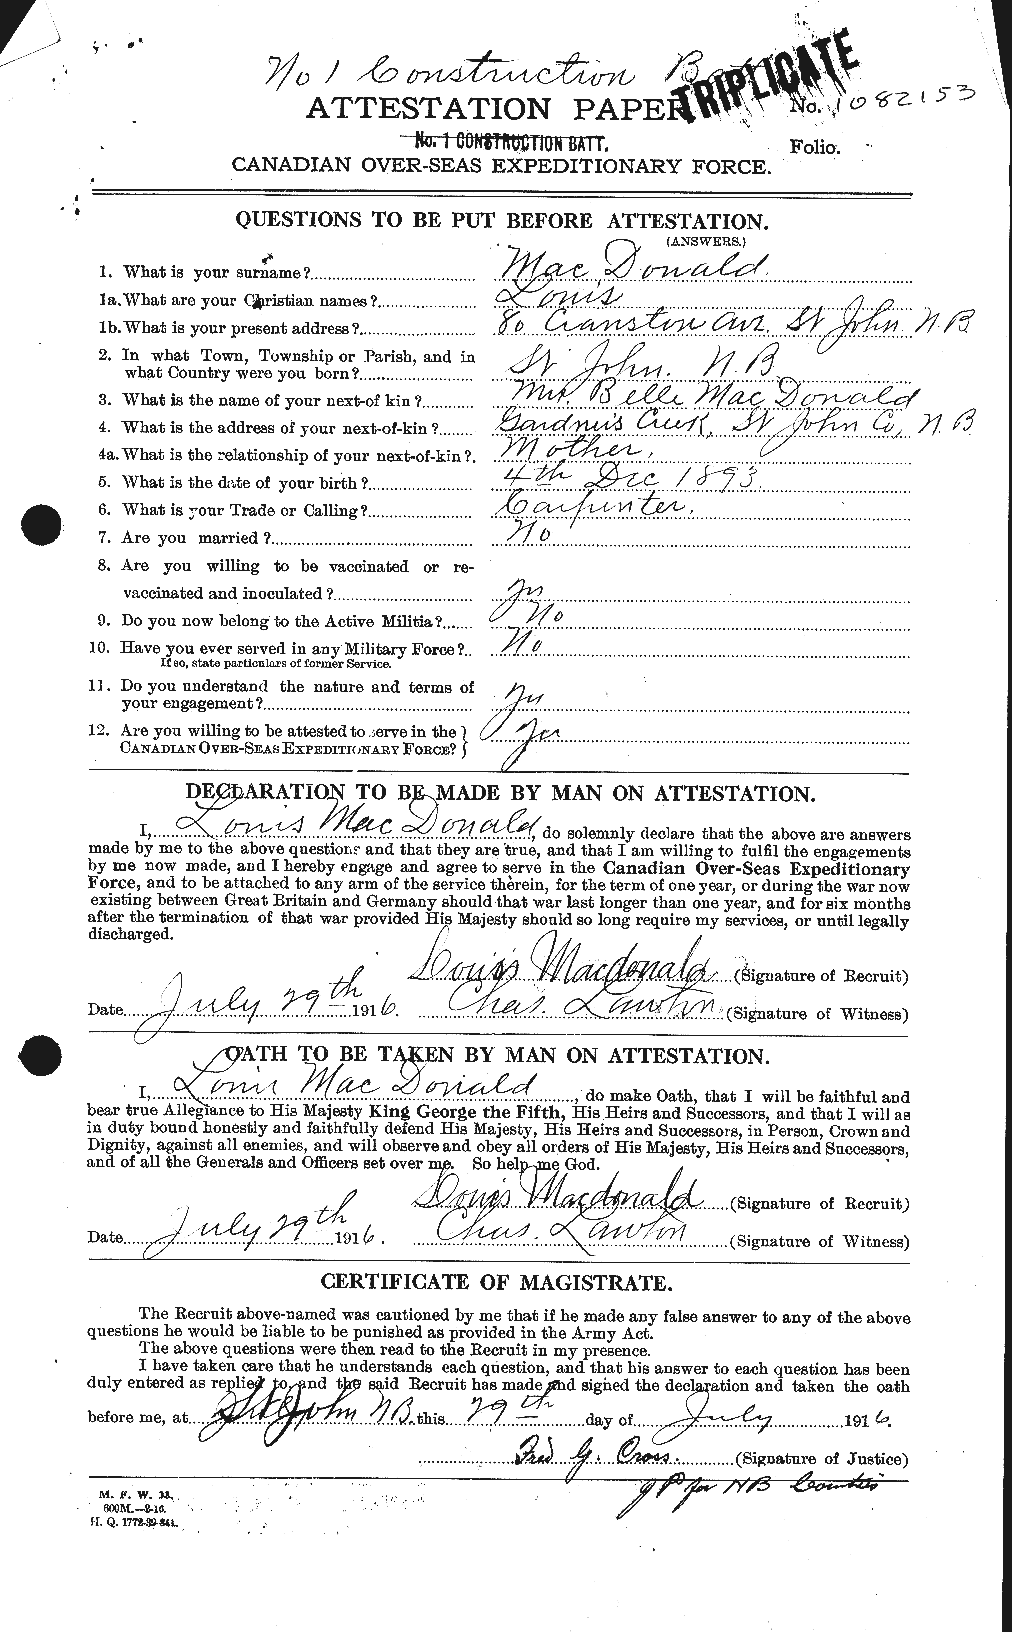 Personnel Records of the First World War - CEF 522582a